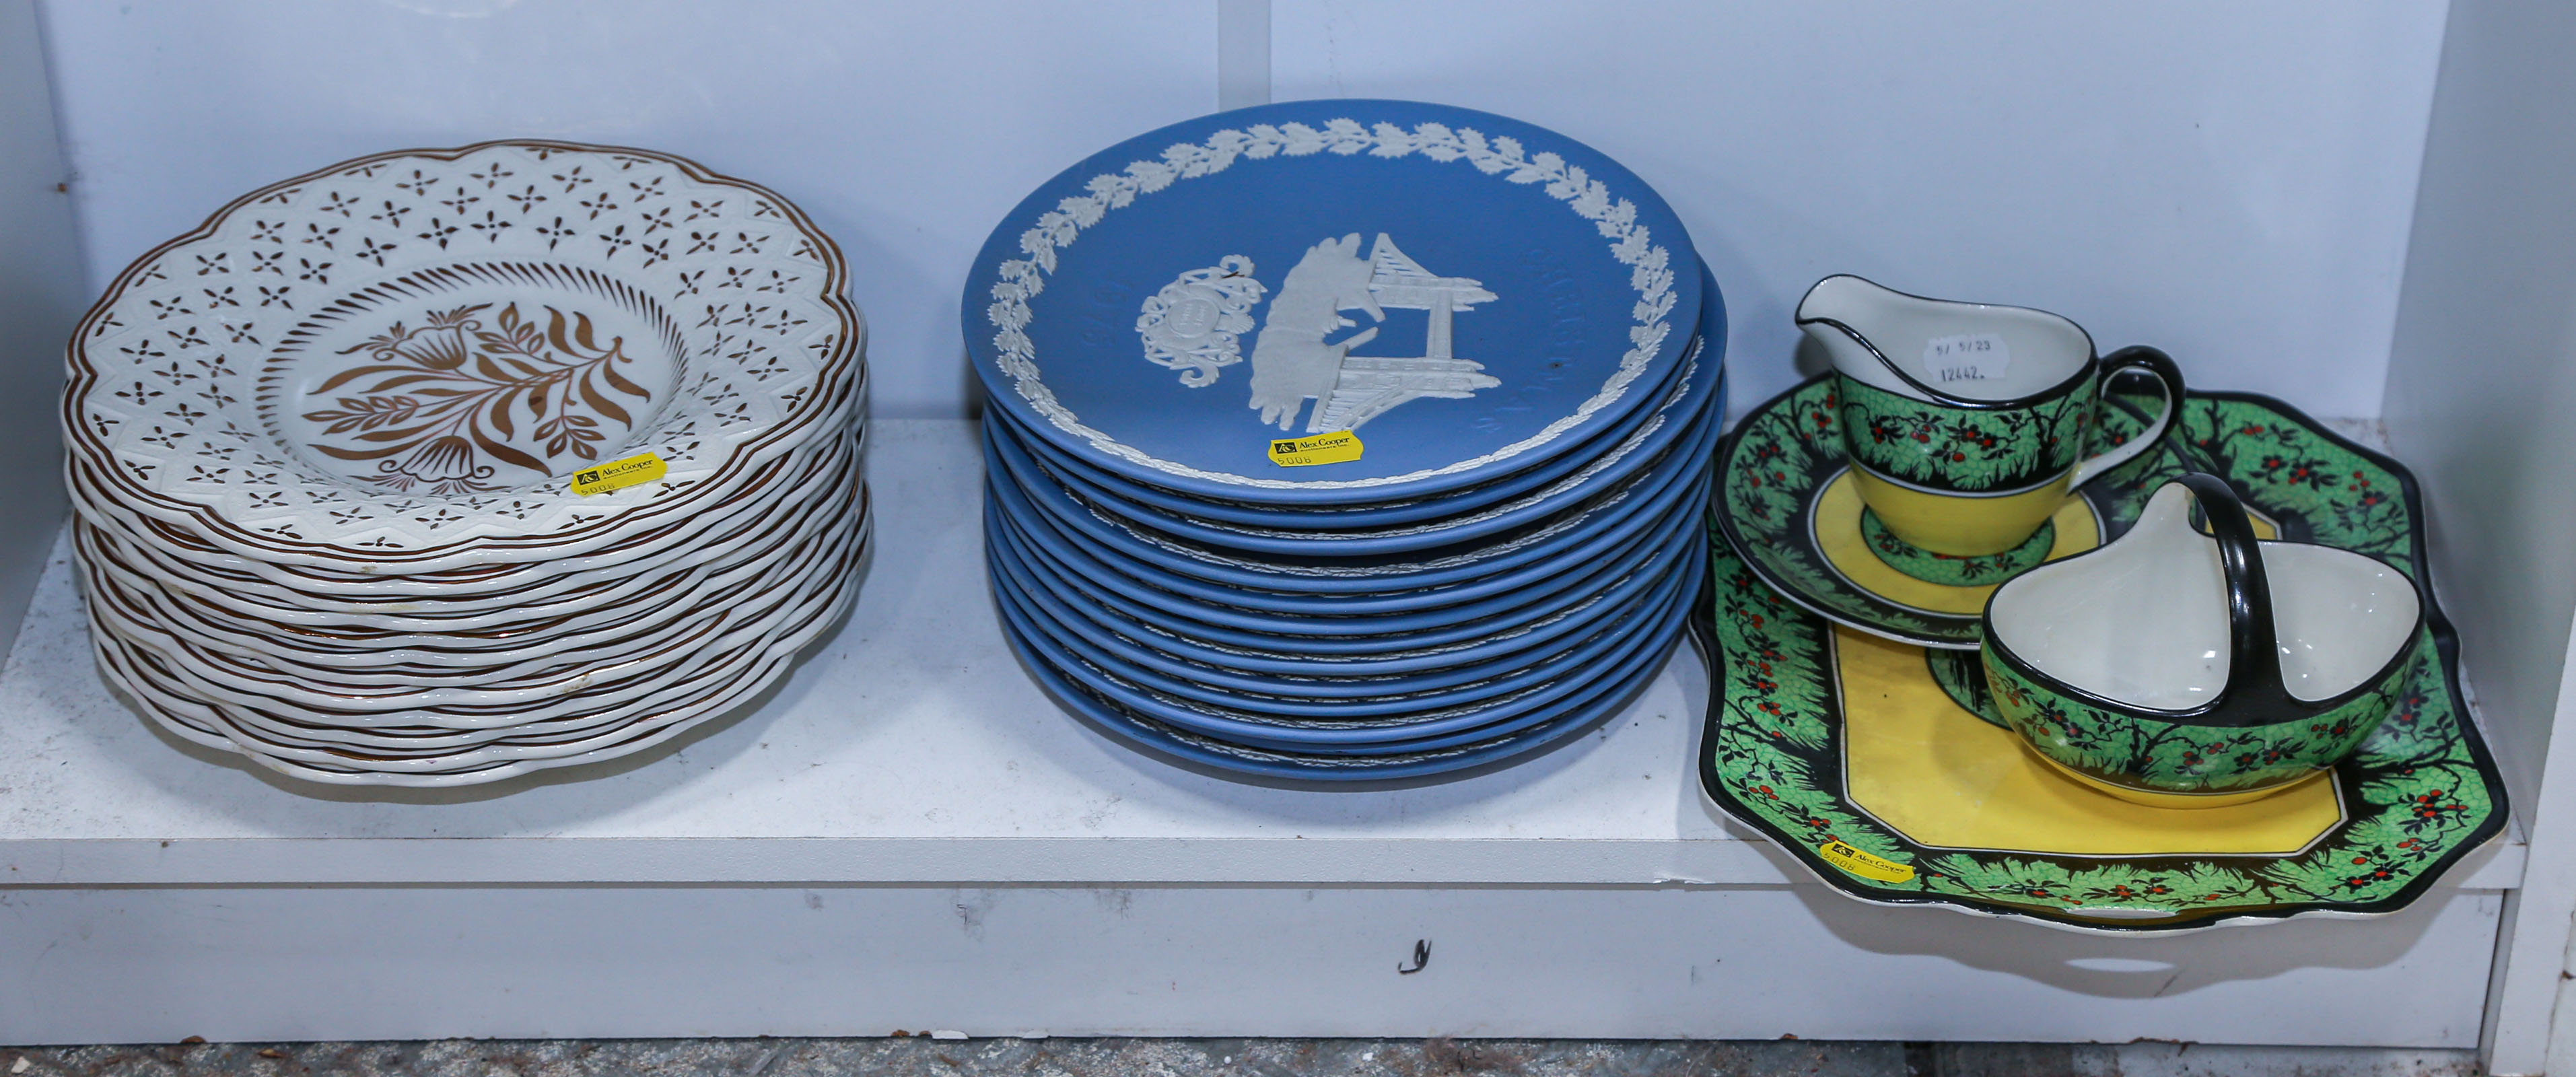 ASSORTMENT OF COLLECTIBLE WEDGWOOD ITEMS